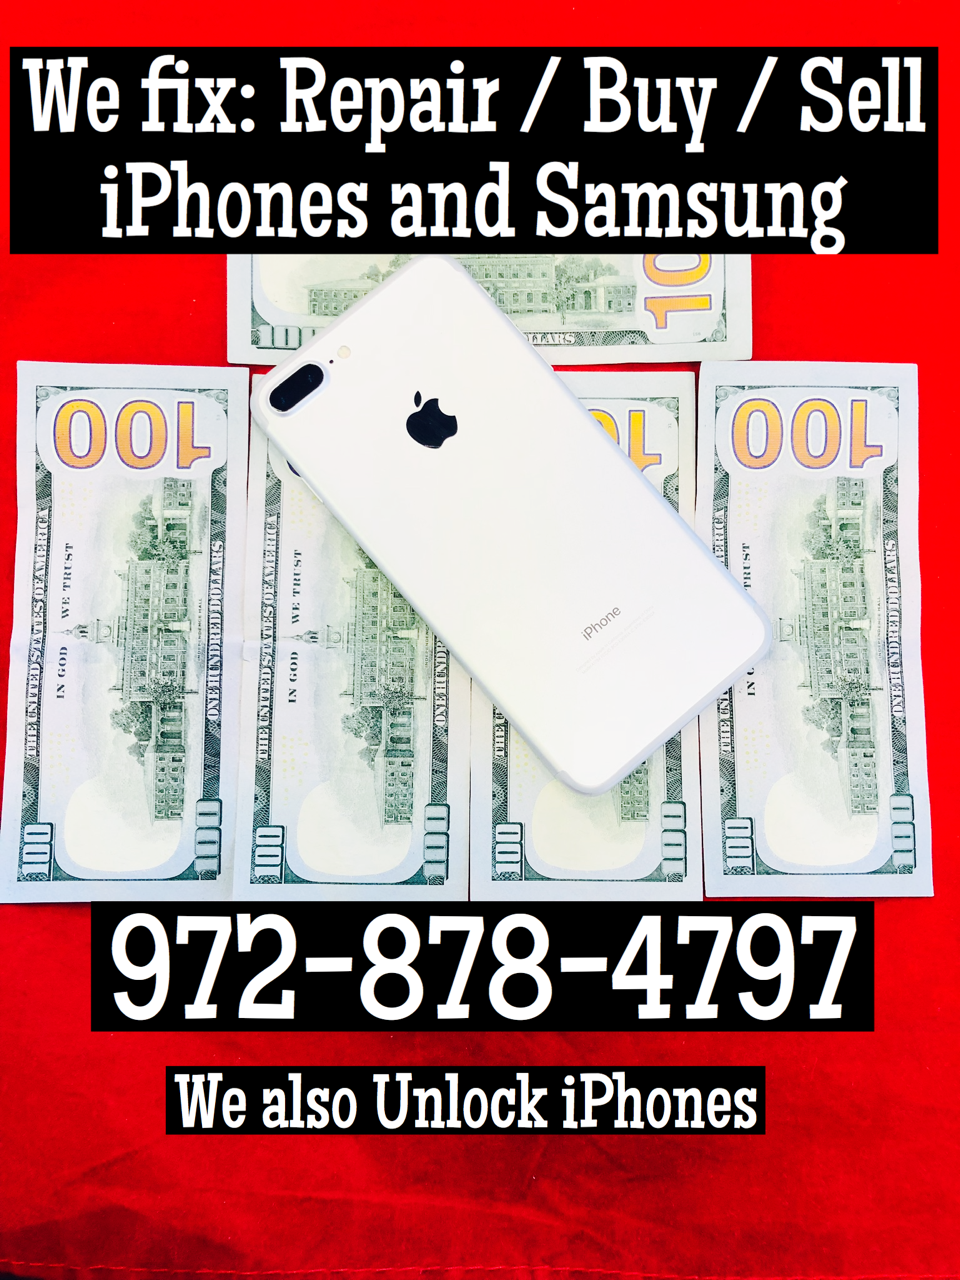 Sell us your iPhones, iPads, Apple Watches and Macbooks. We buy iphones! Sell iphone dallas